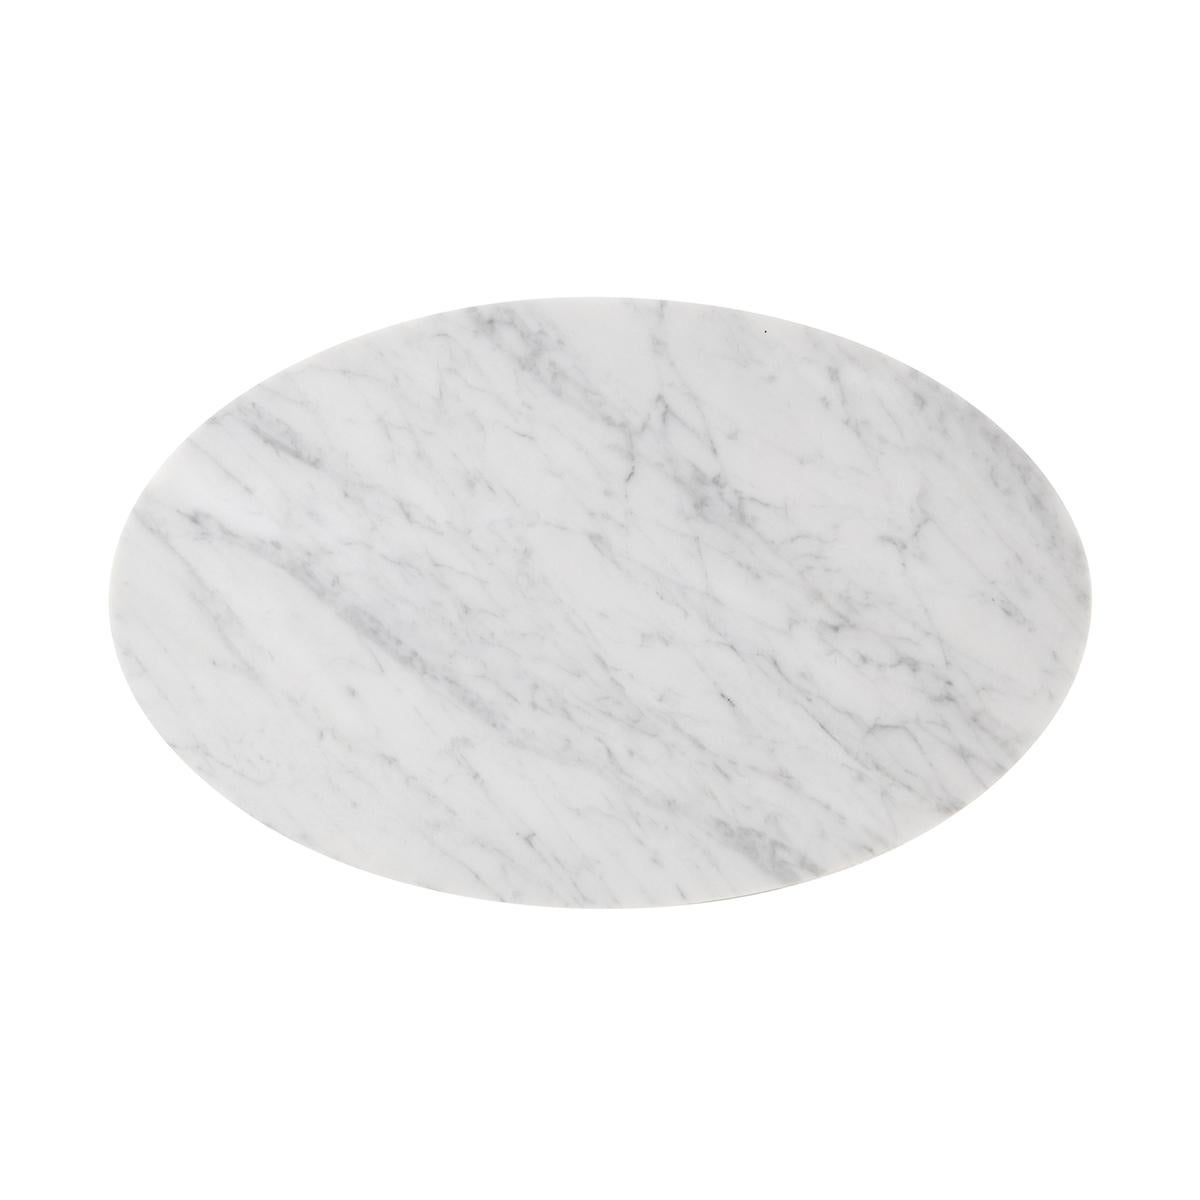 With a canted edge oval Carrara marble top on a modern brass finish tapered support with a horseshoe form base.

Dimensions: 16